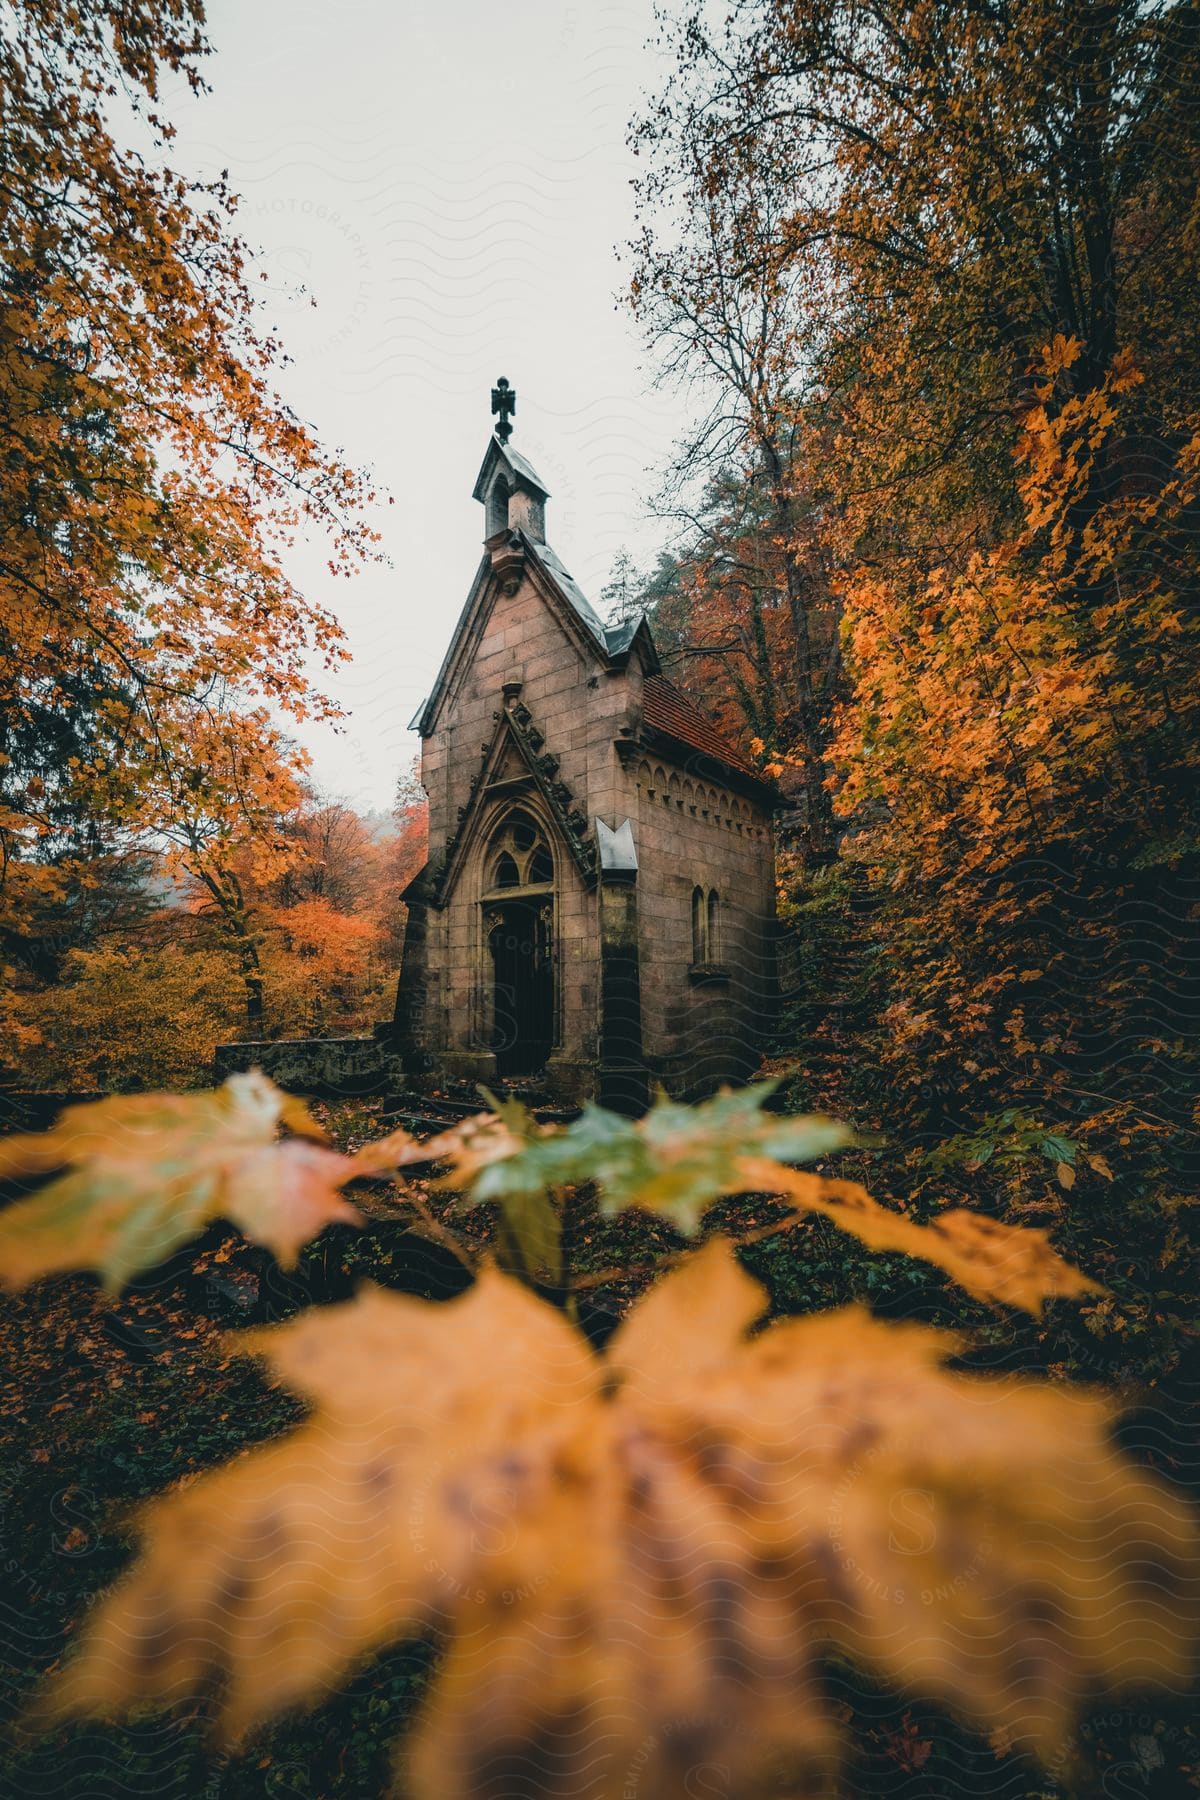 A building in a forest during the fall season